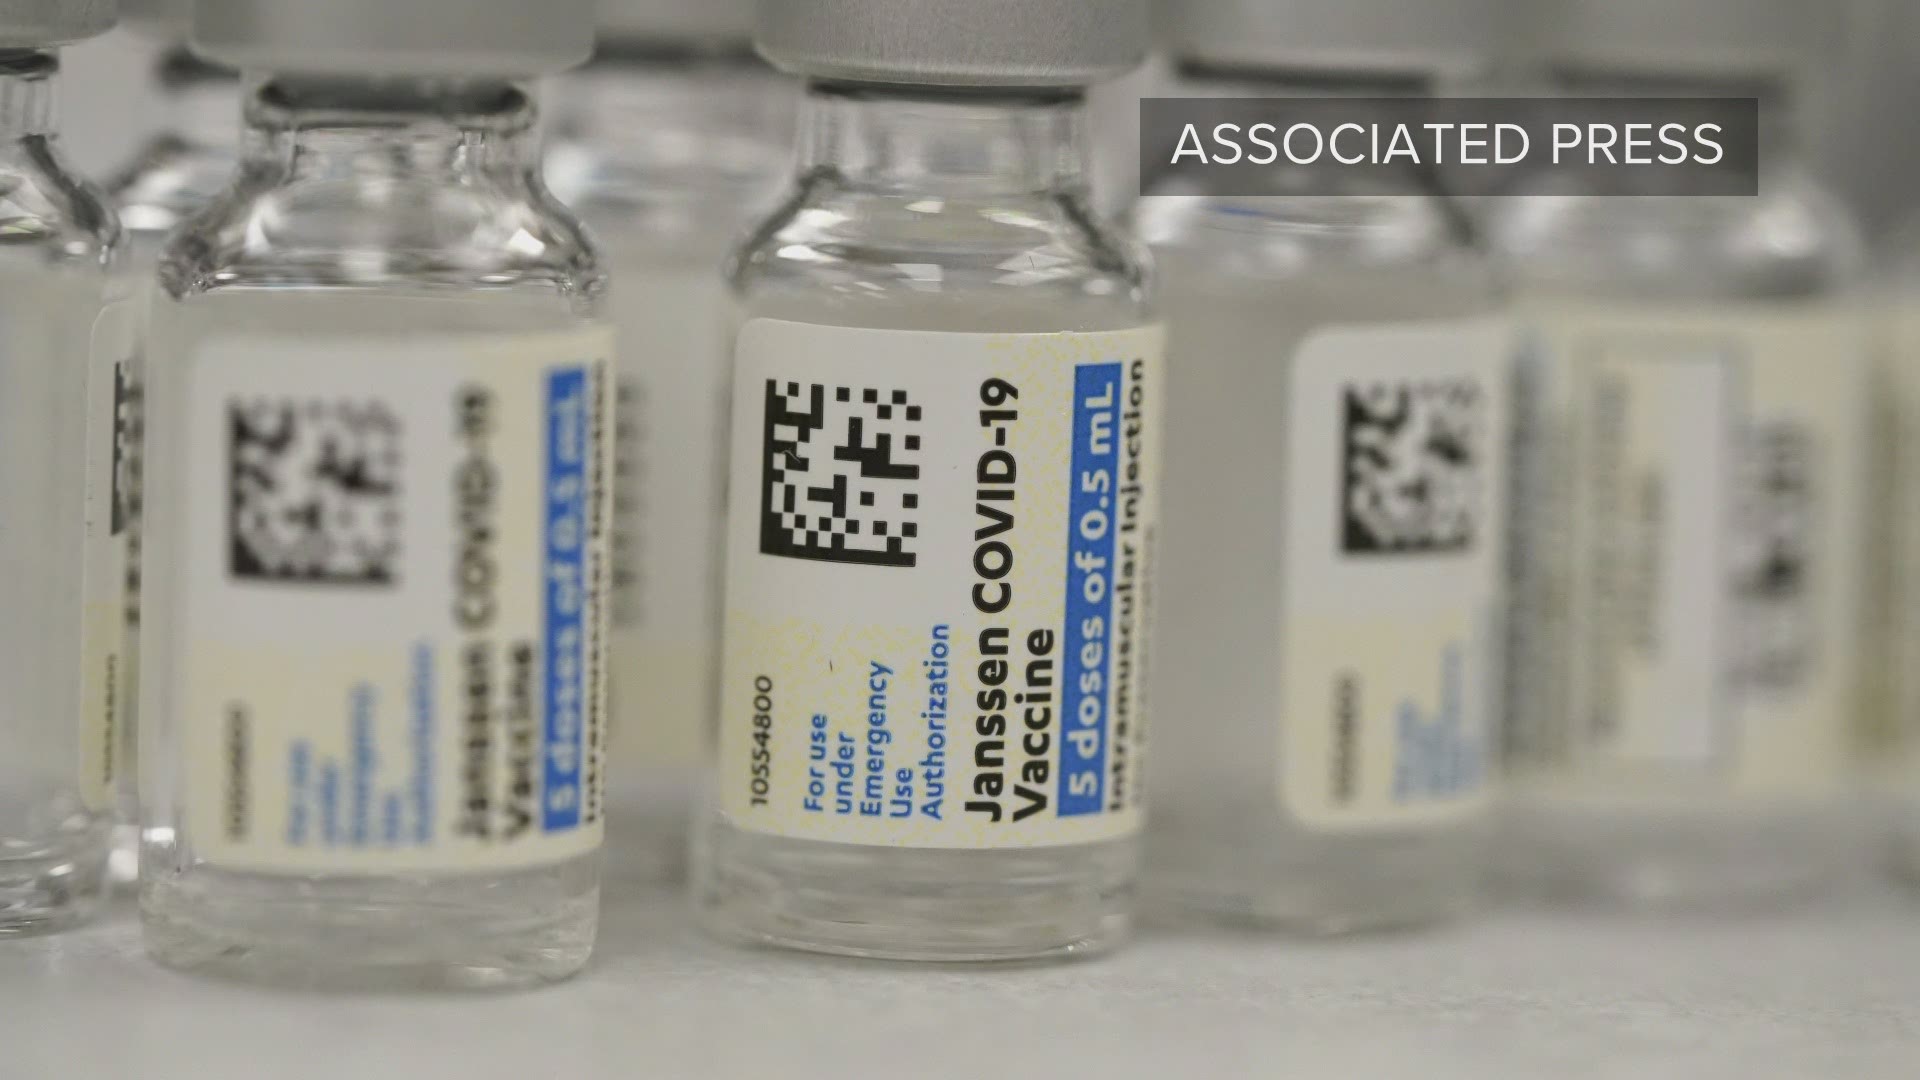 People hoping to get the J&J vaccine in order to only have to get one shot, will now have to settle for a two-shot regimen or wait until J&J can be used again.